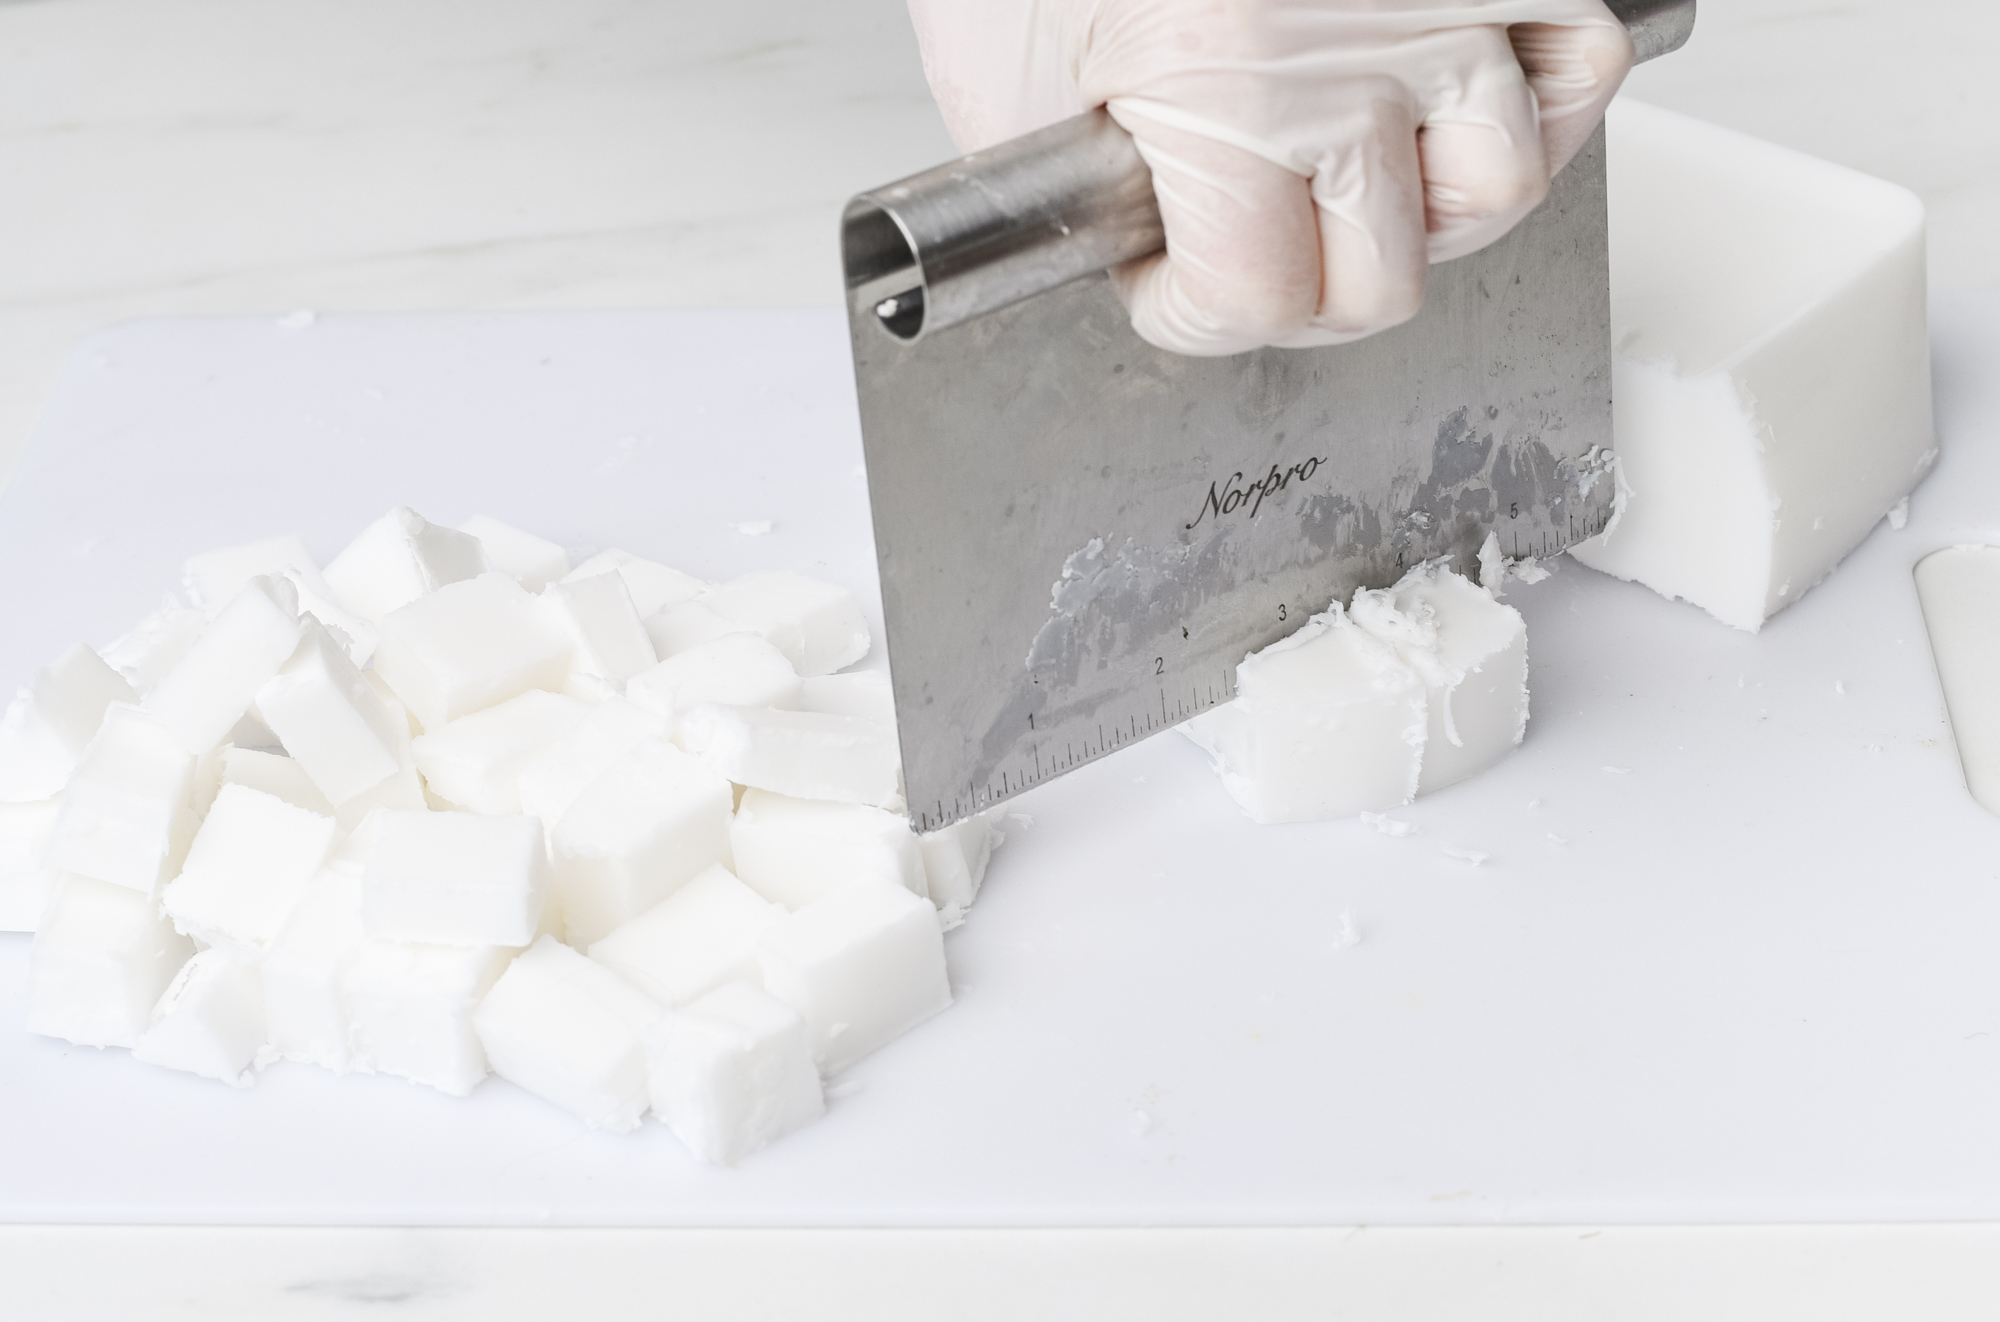 Cutting soap block into cubes.